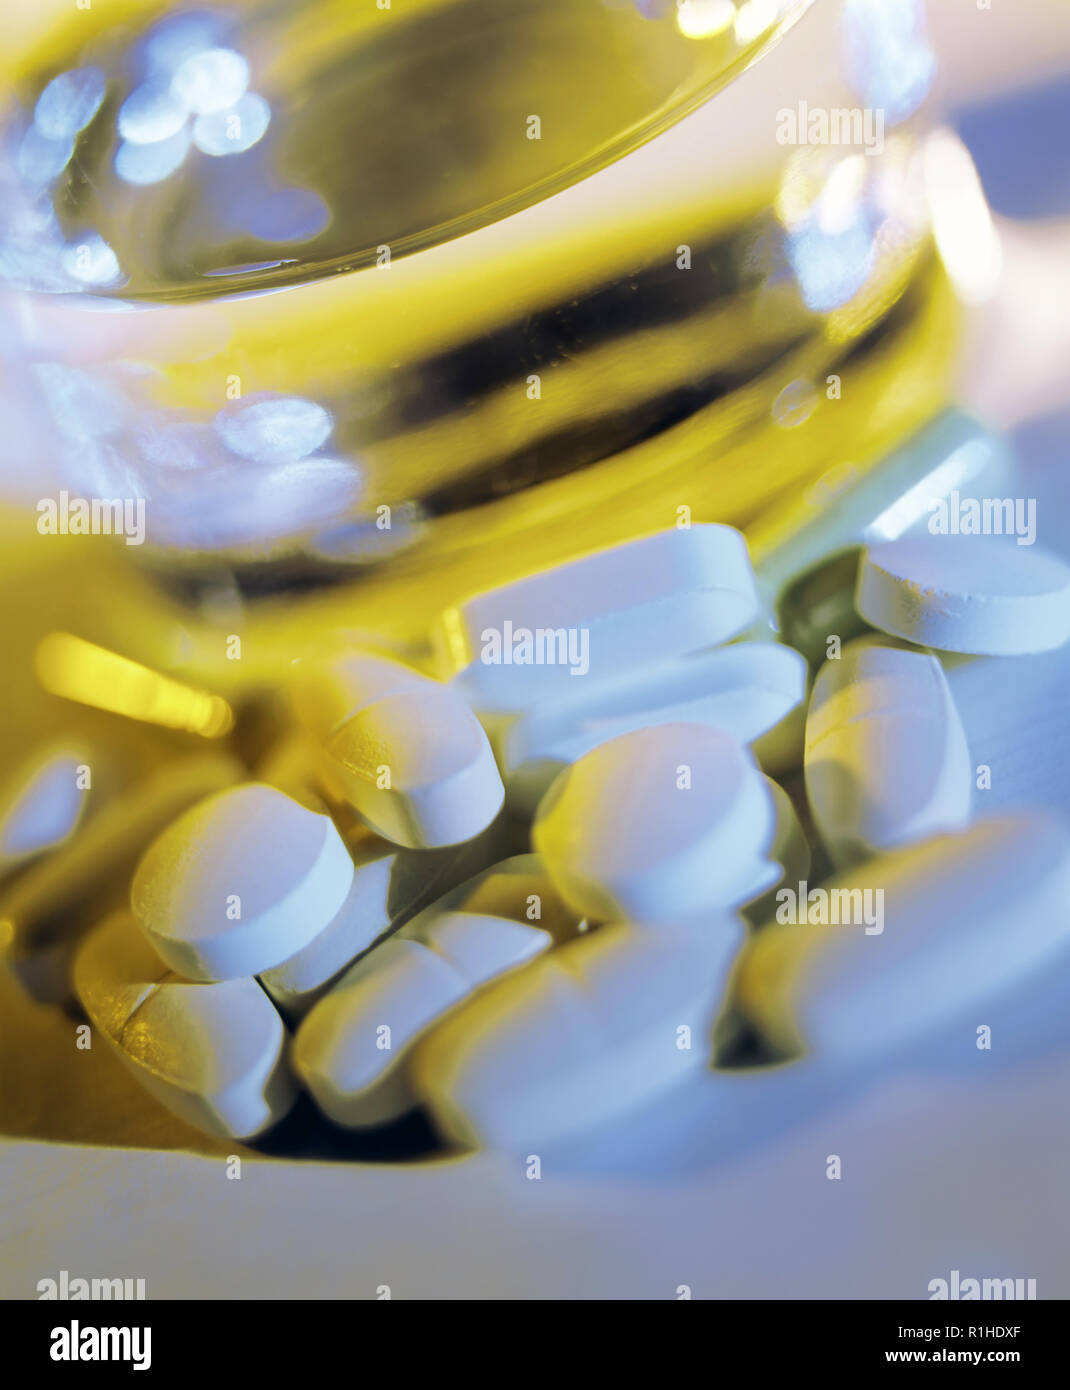 Close-up of pills and glass of water. Stock Photo